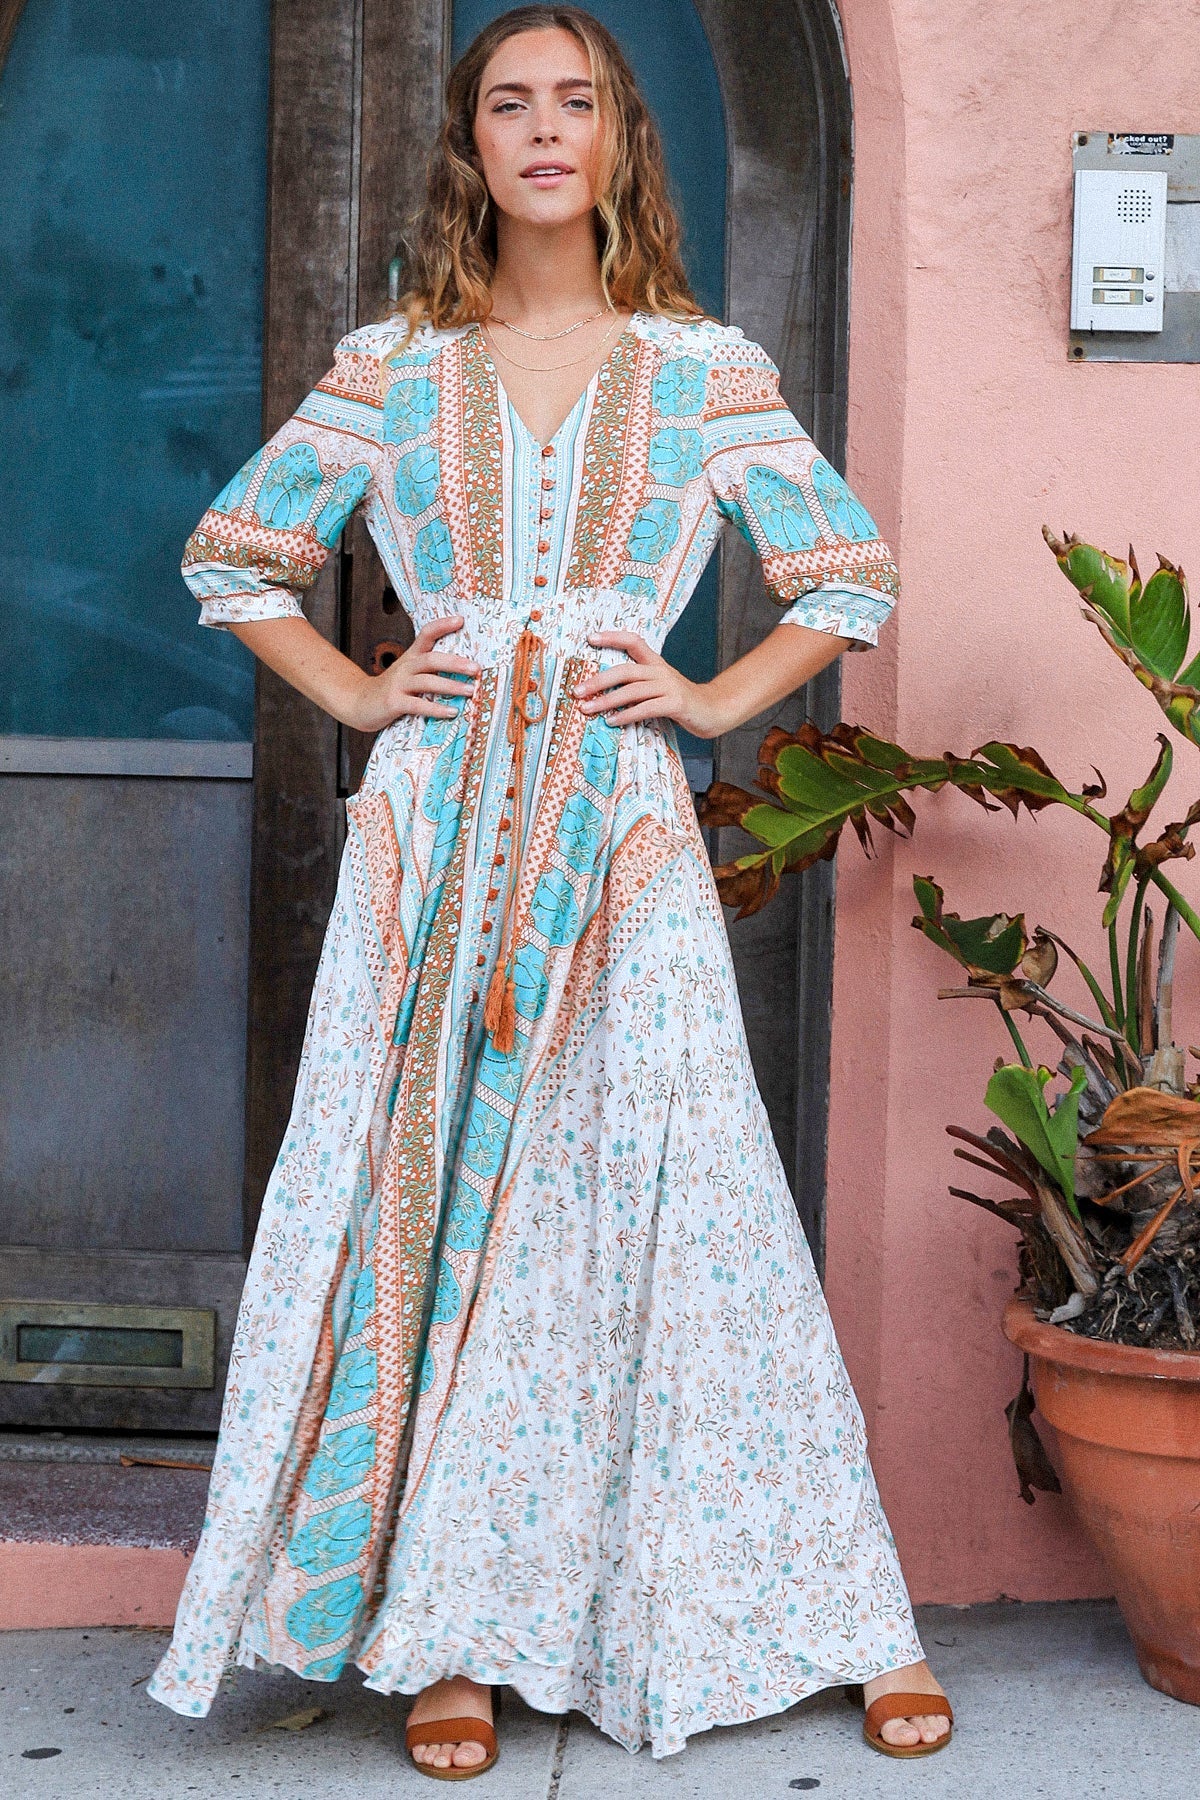 Bailey Maxi Boho Dress: 
Last years bestseller is BACK. The Bailey Dress sold out time and time again and who can blame it?
The Bailey Maxi Dress has a mix of soft blues and browns in a gor - Ciao Bella Dresses 